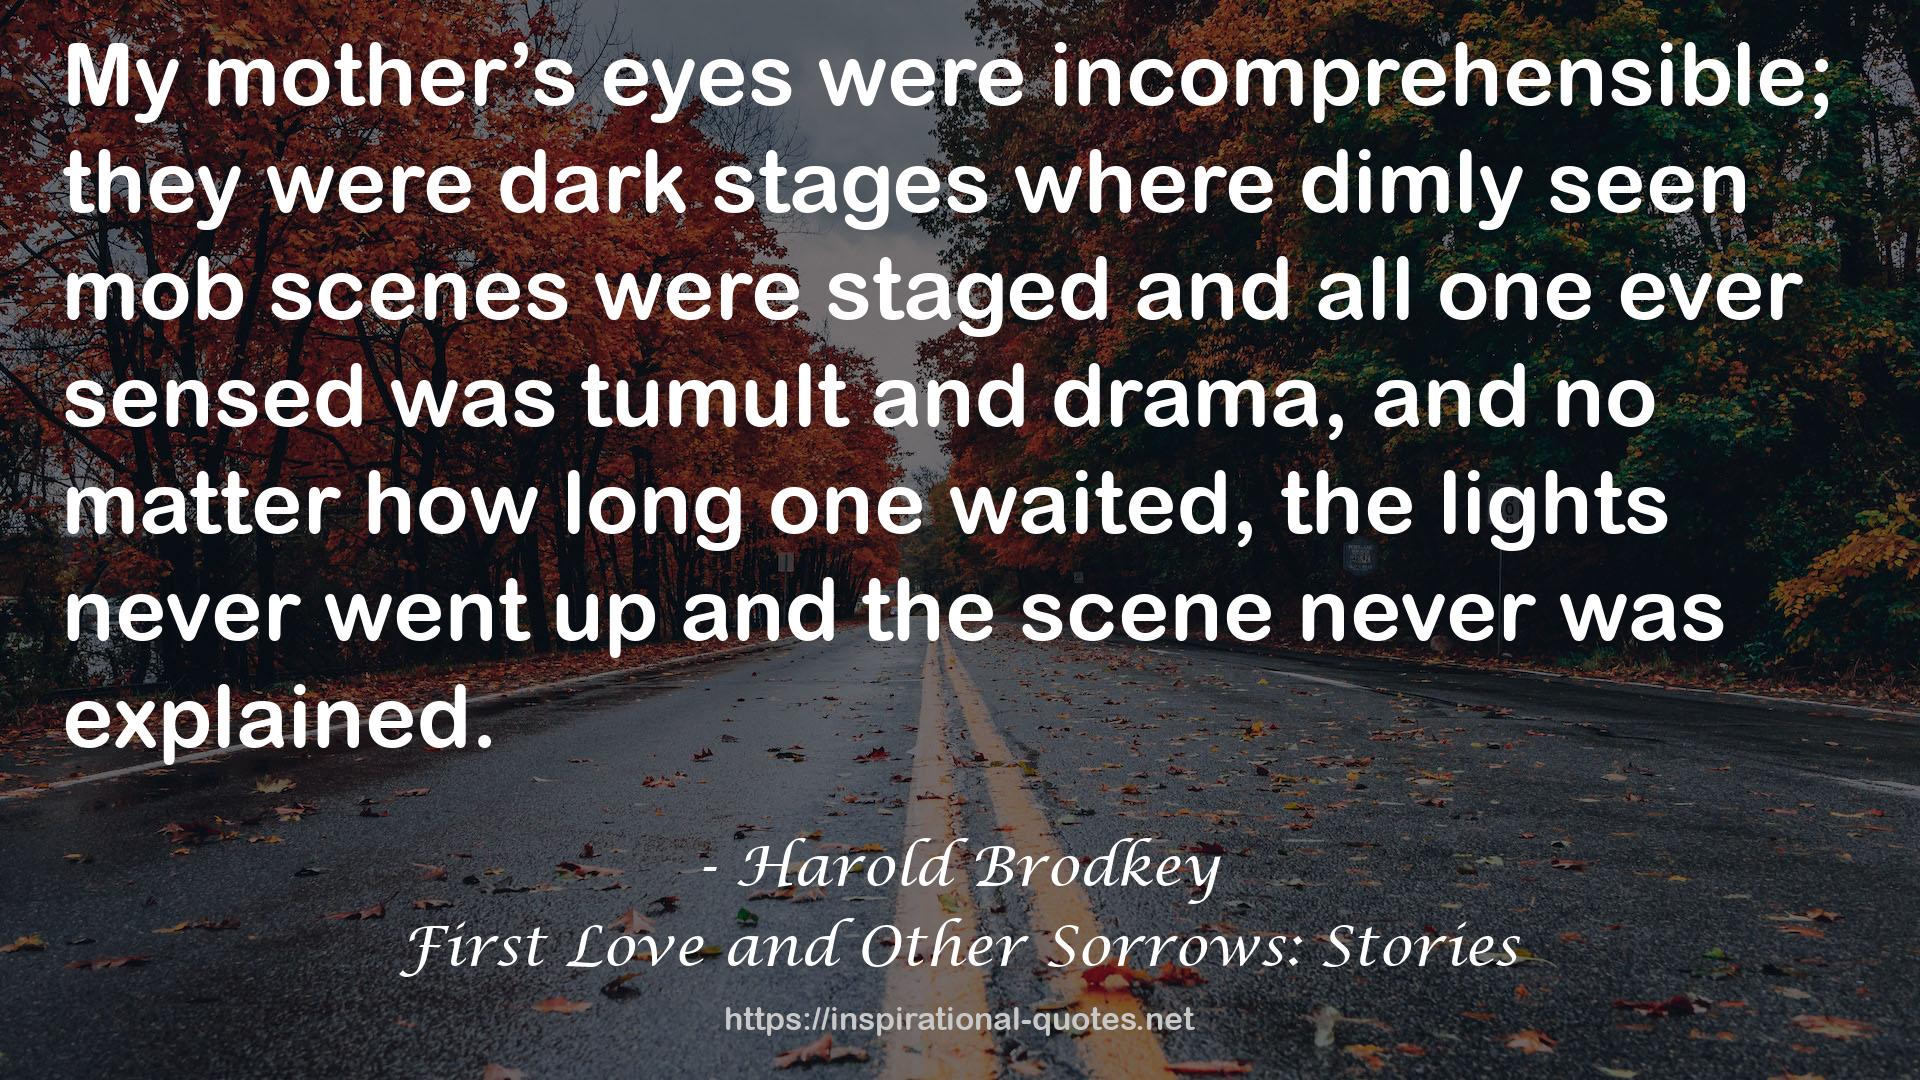 First Love and Other Sorrows: Stories QUOTES